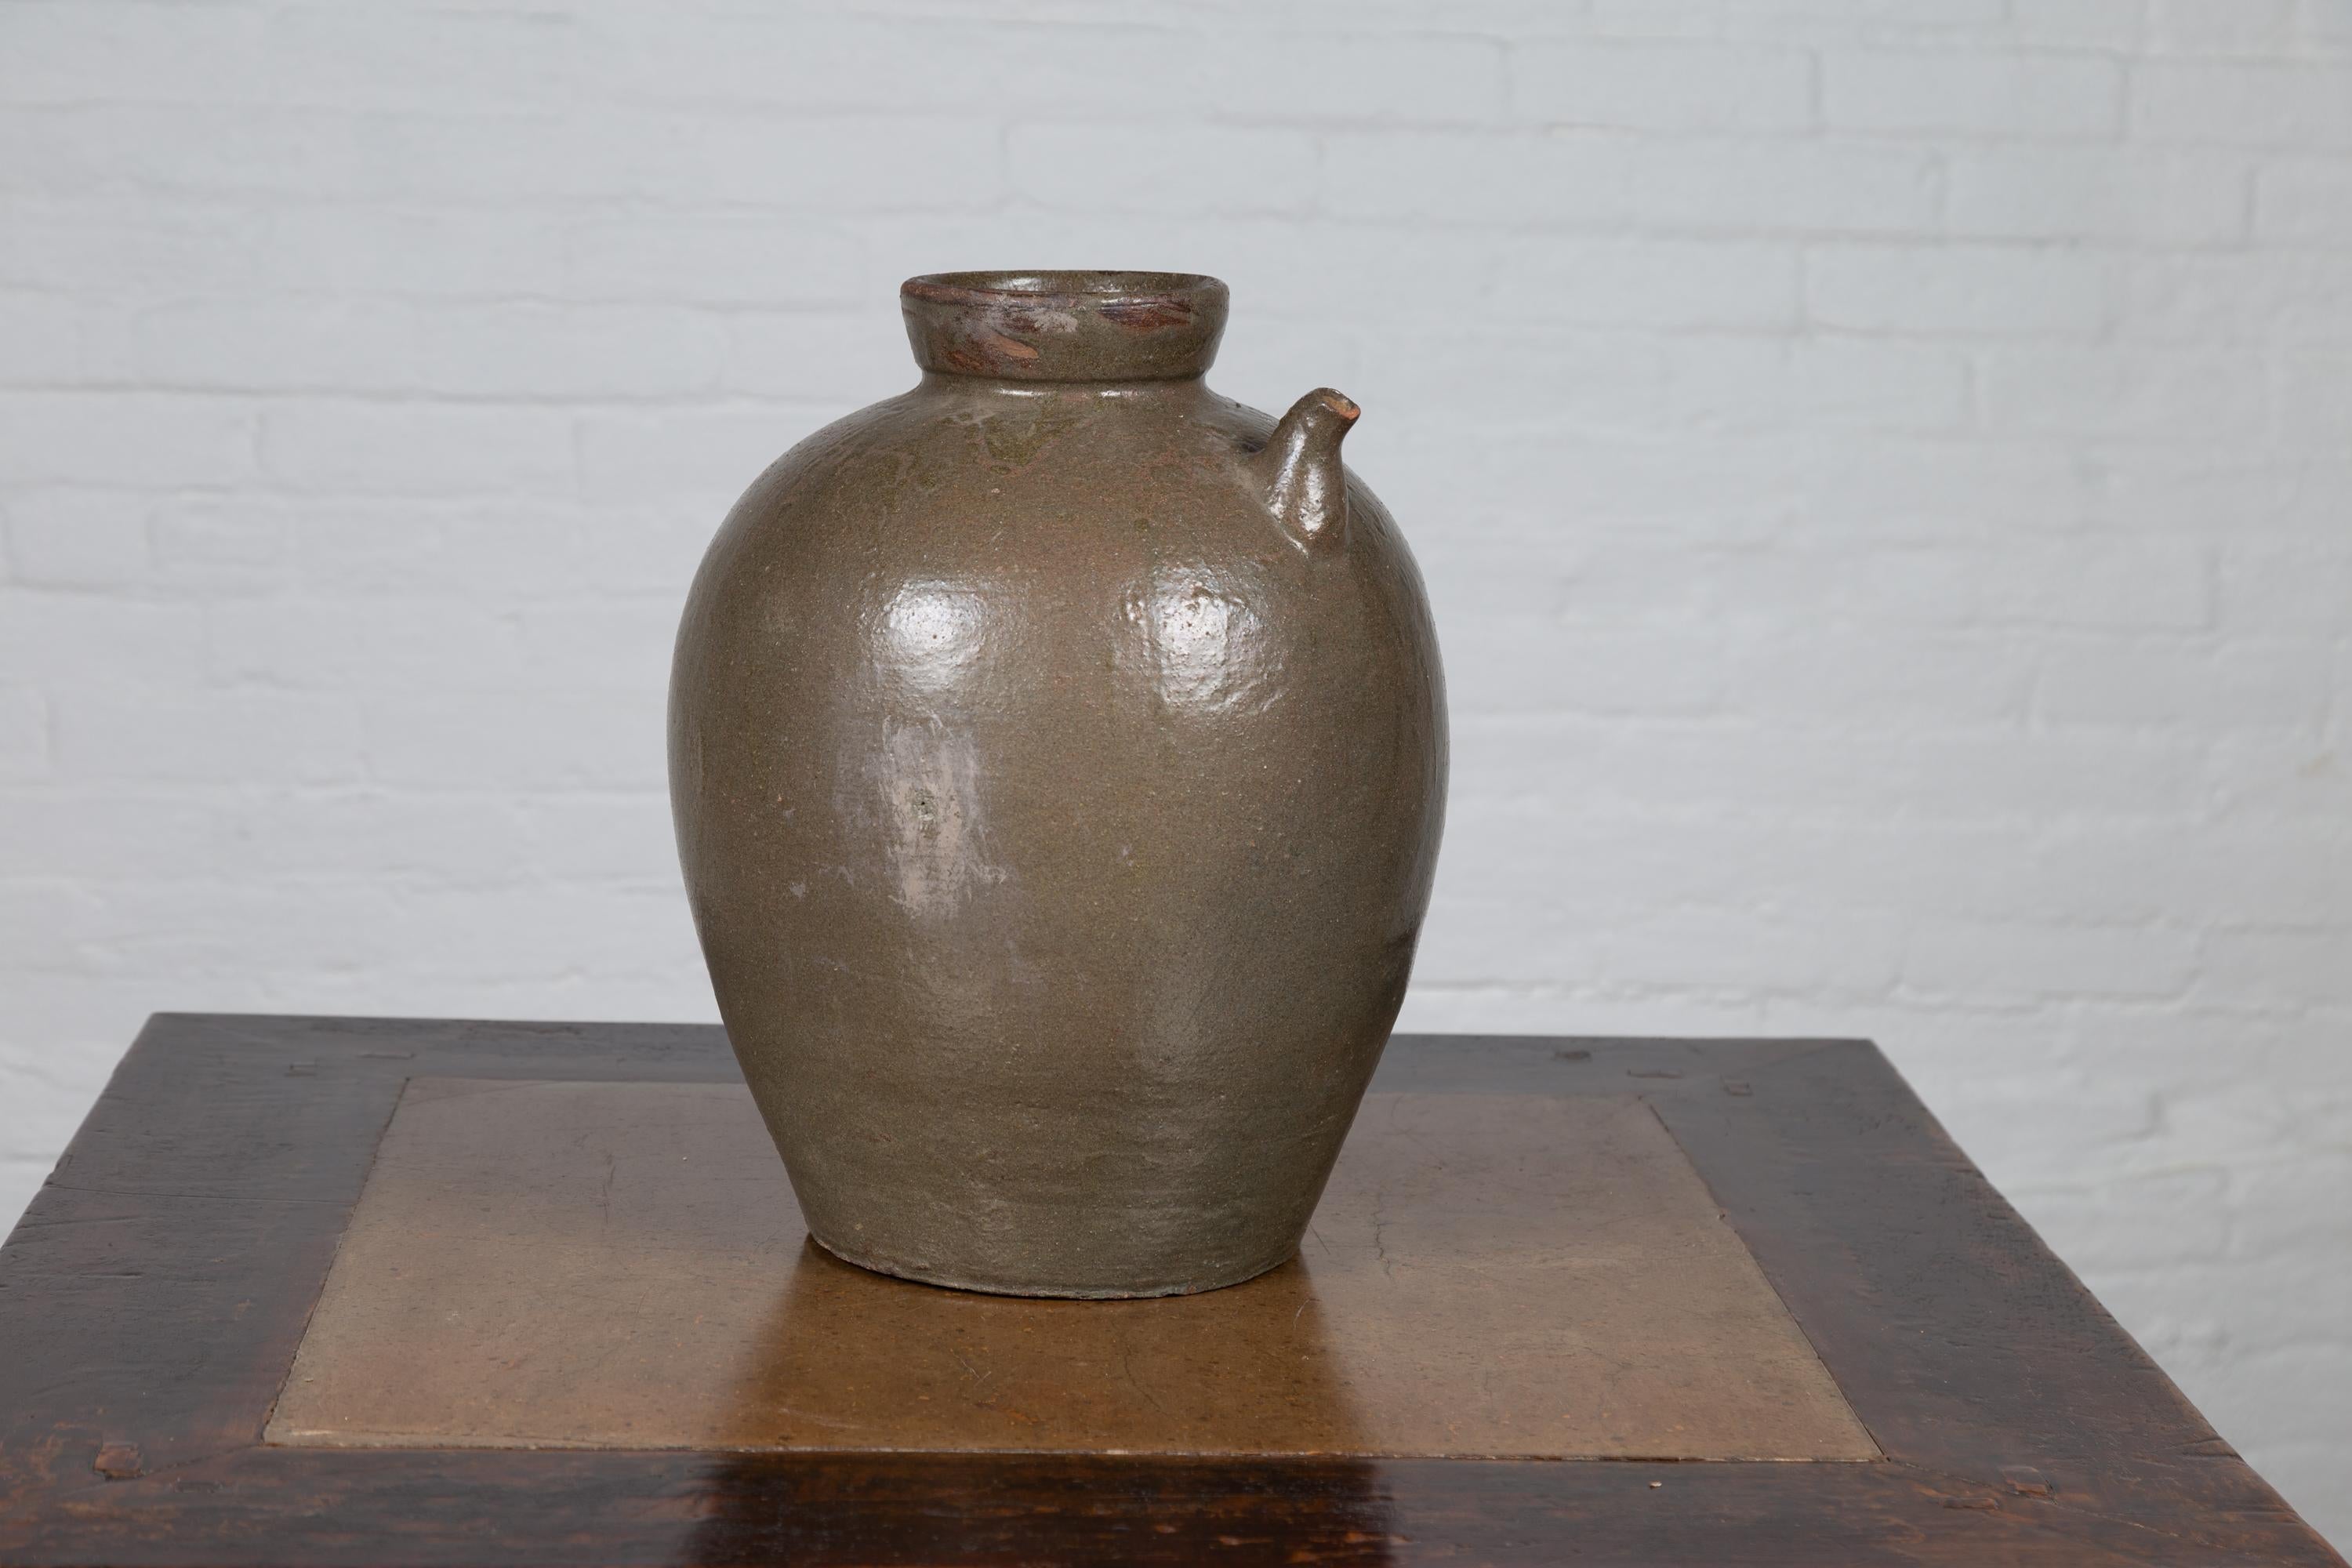 Chinese Qing Dynasty Glazed Water Jug with Petite Spout from the 19th Century For Sale 3